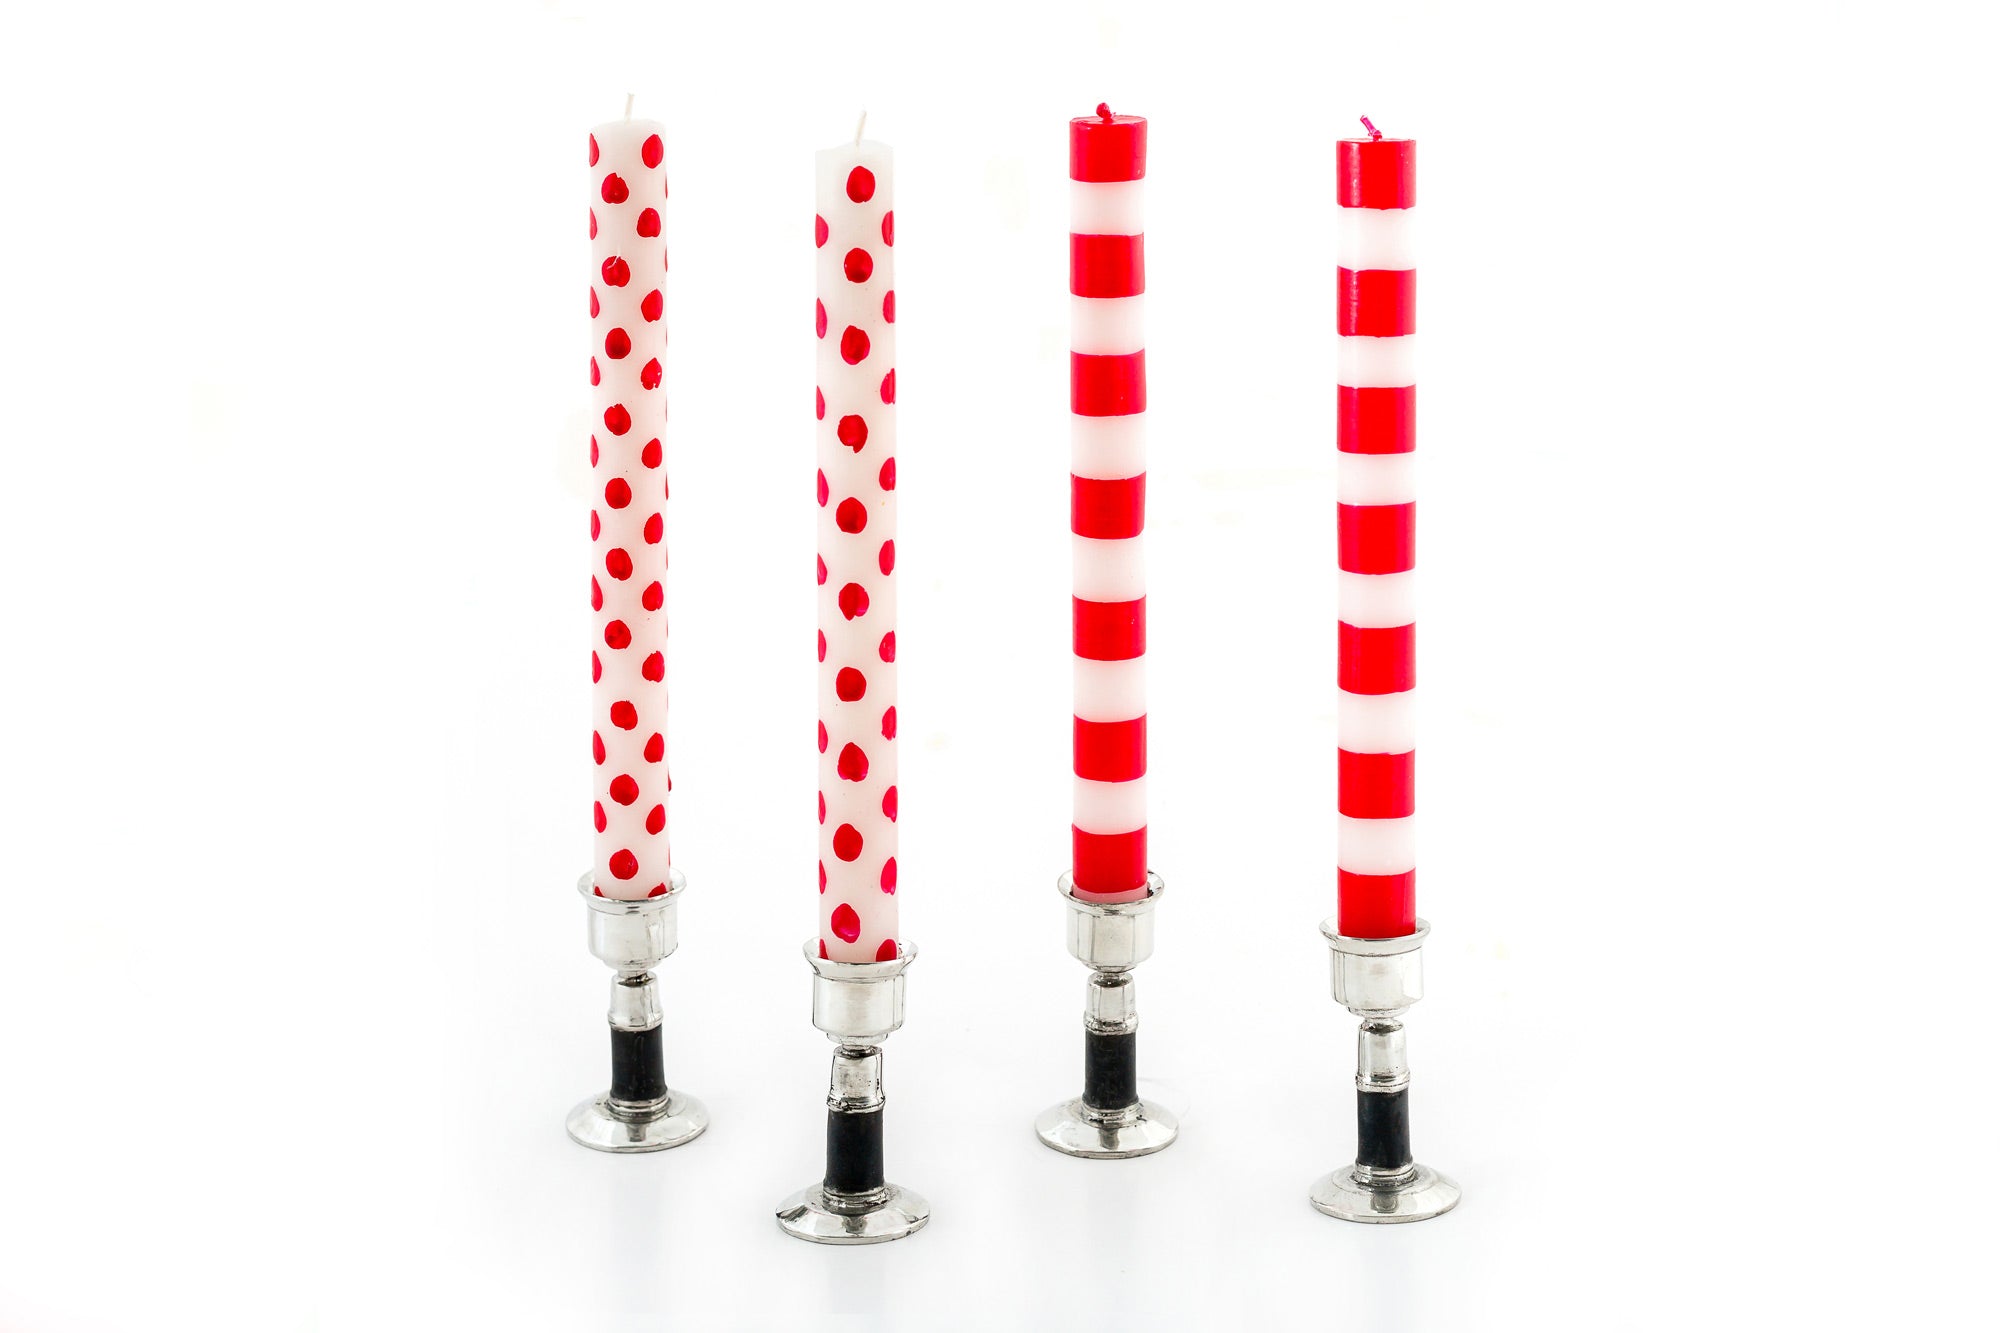 Two white taper candles with red dots alongside two white tapers with red stripes, all standing in pewter taper holders with black bands. Fair Trade products.